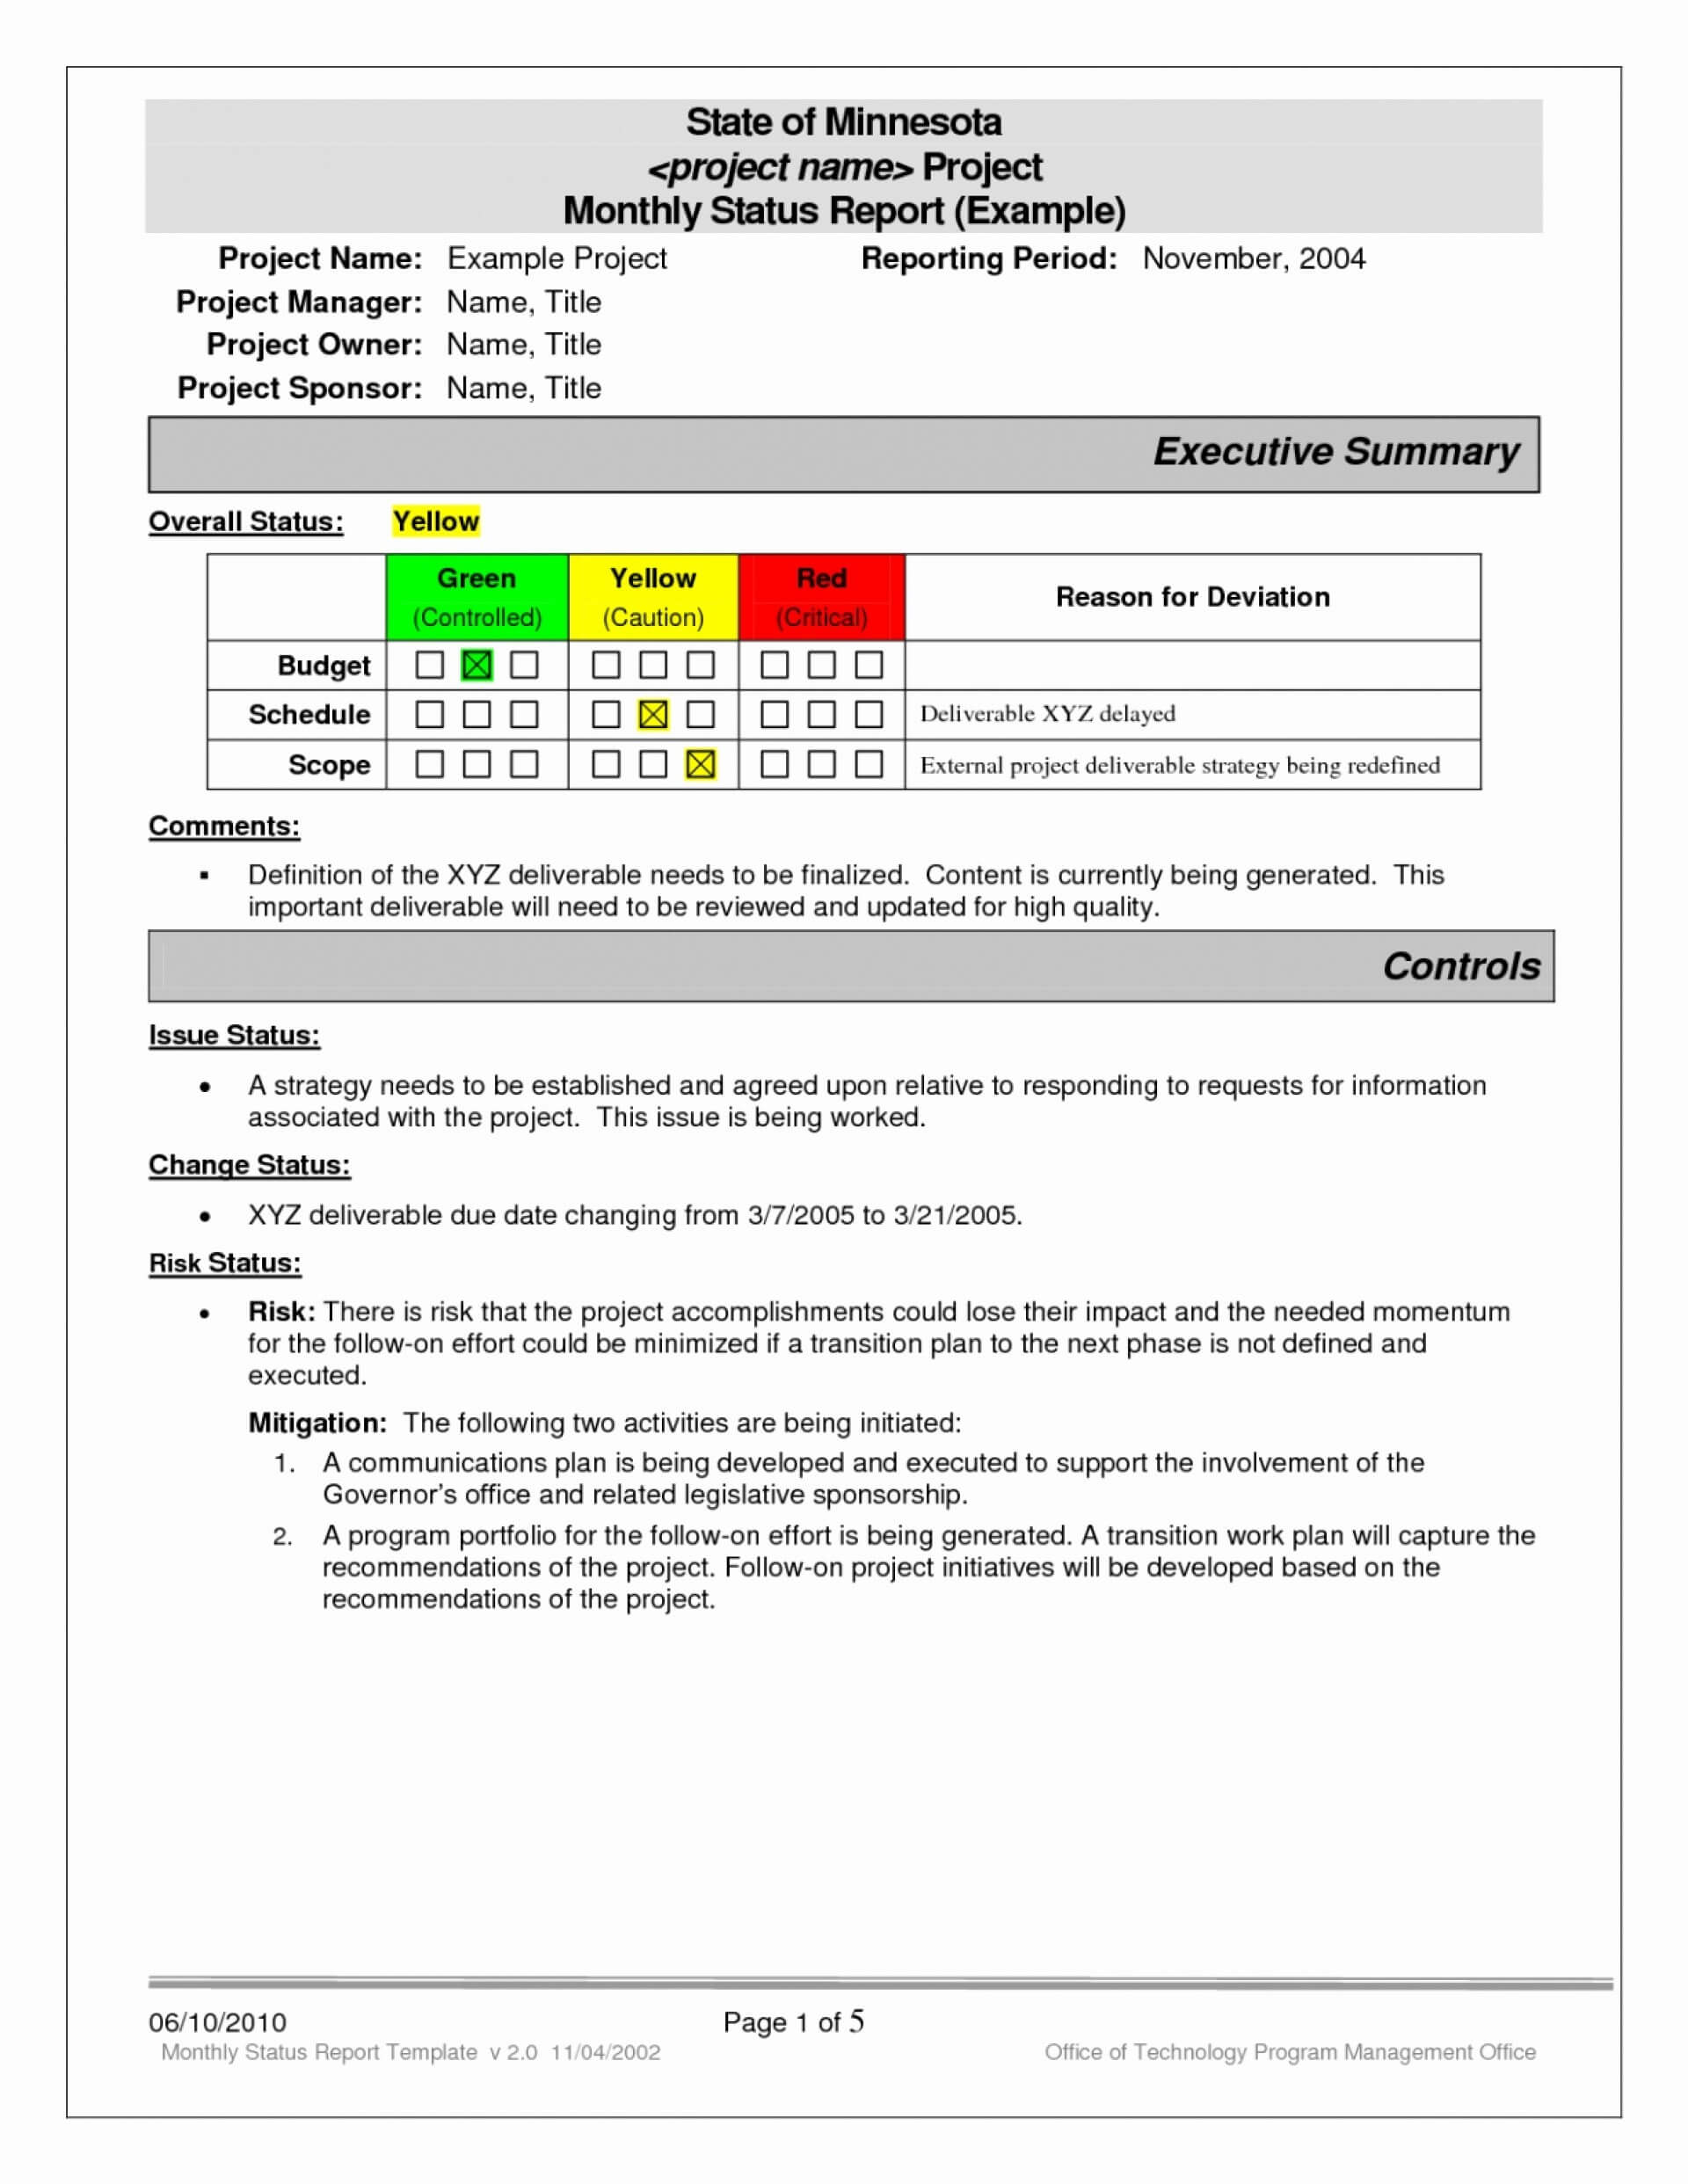 023 Excel Project Status Report Weekly Template 4Vy49Mzf Throughout Software Testing Weekly Status Report Template